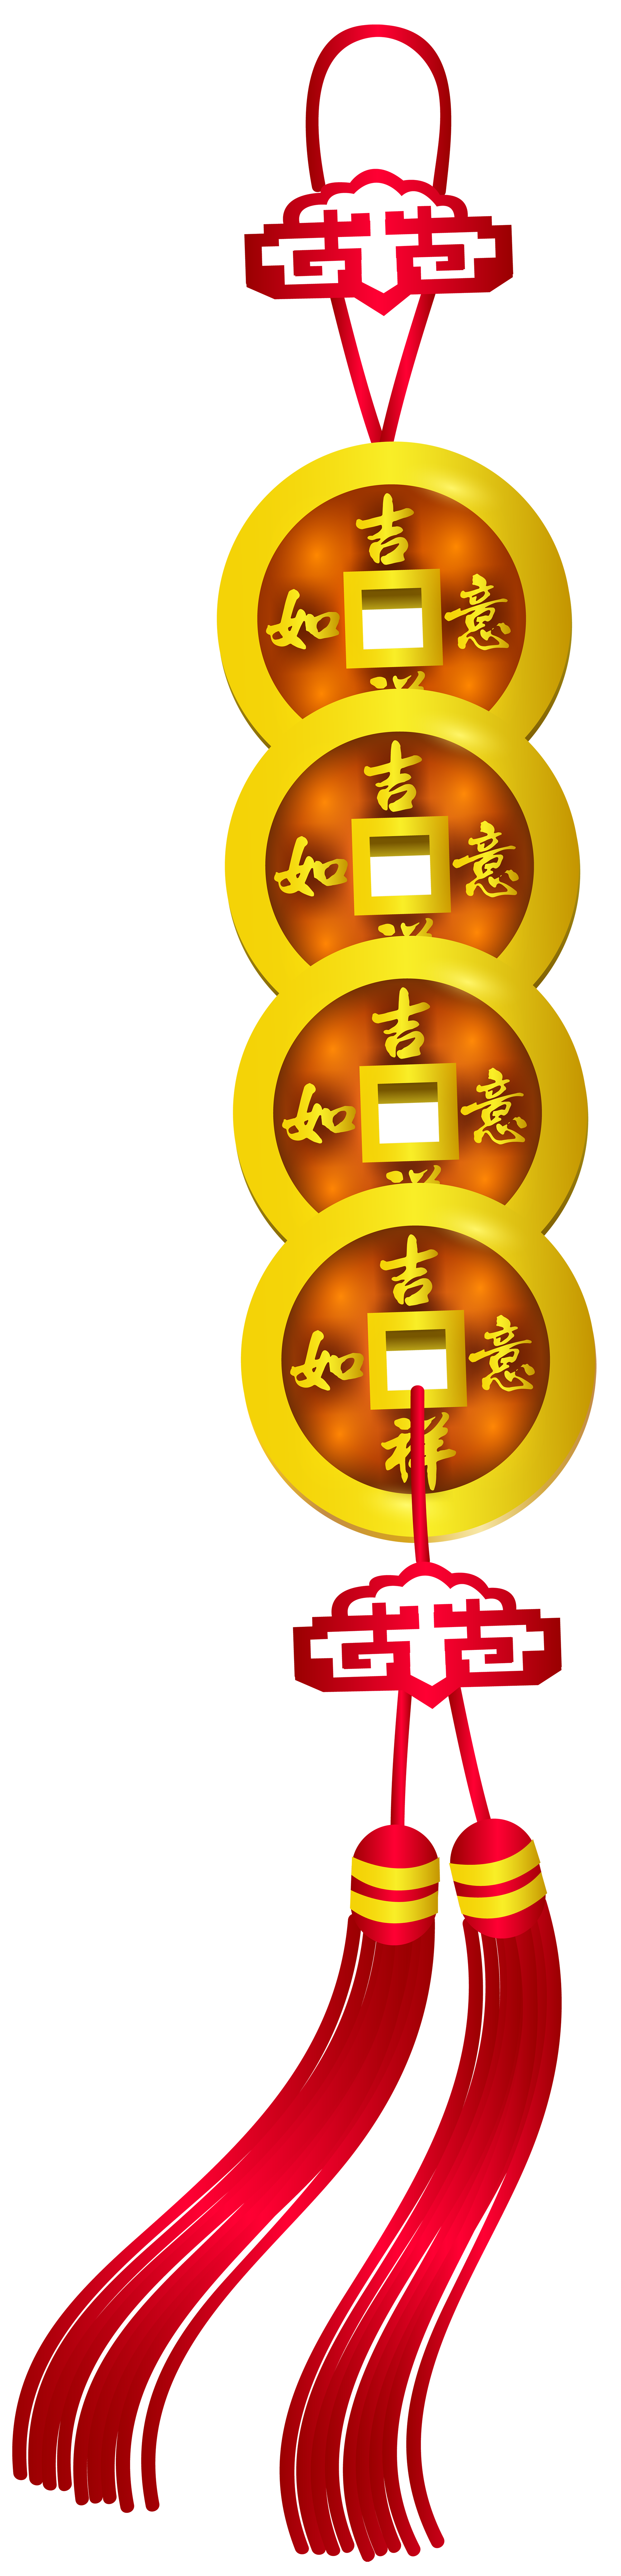 oranges clipart chinese new year